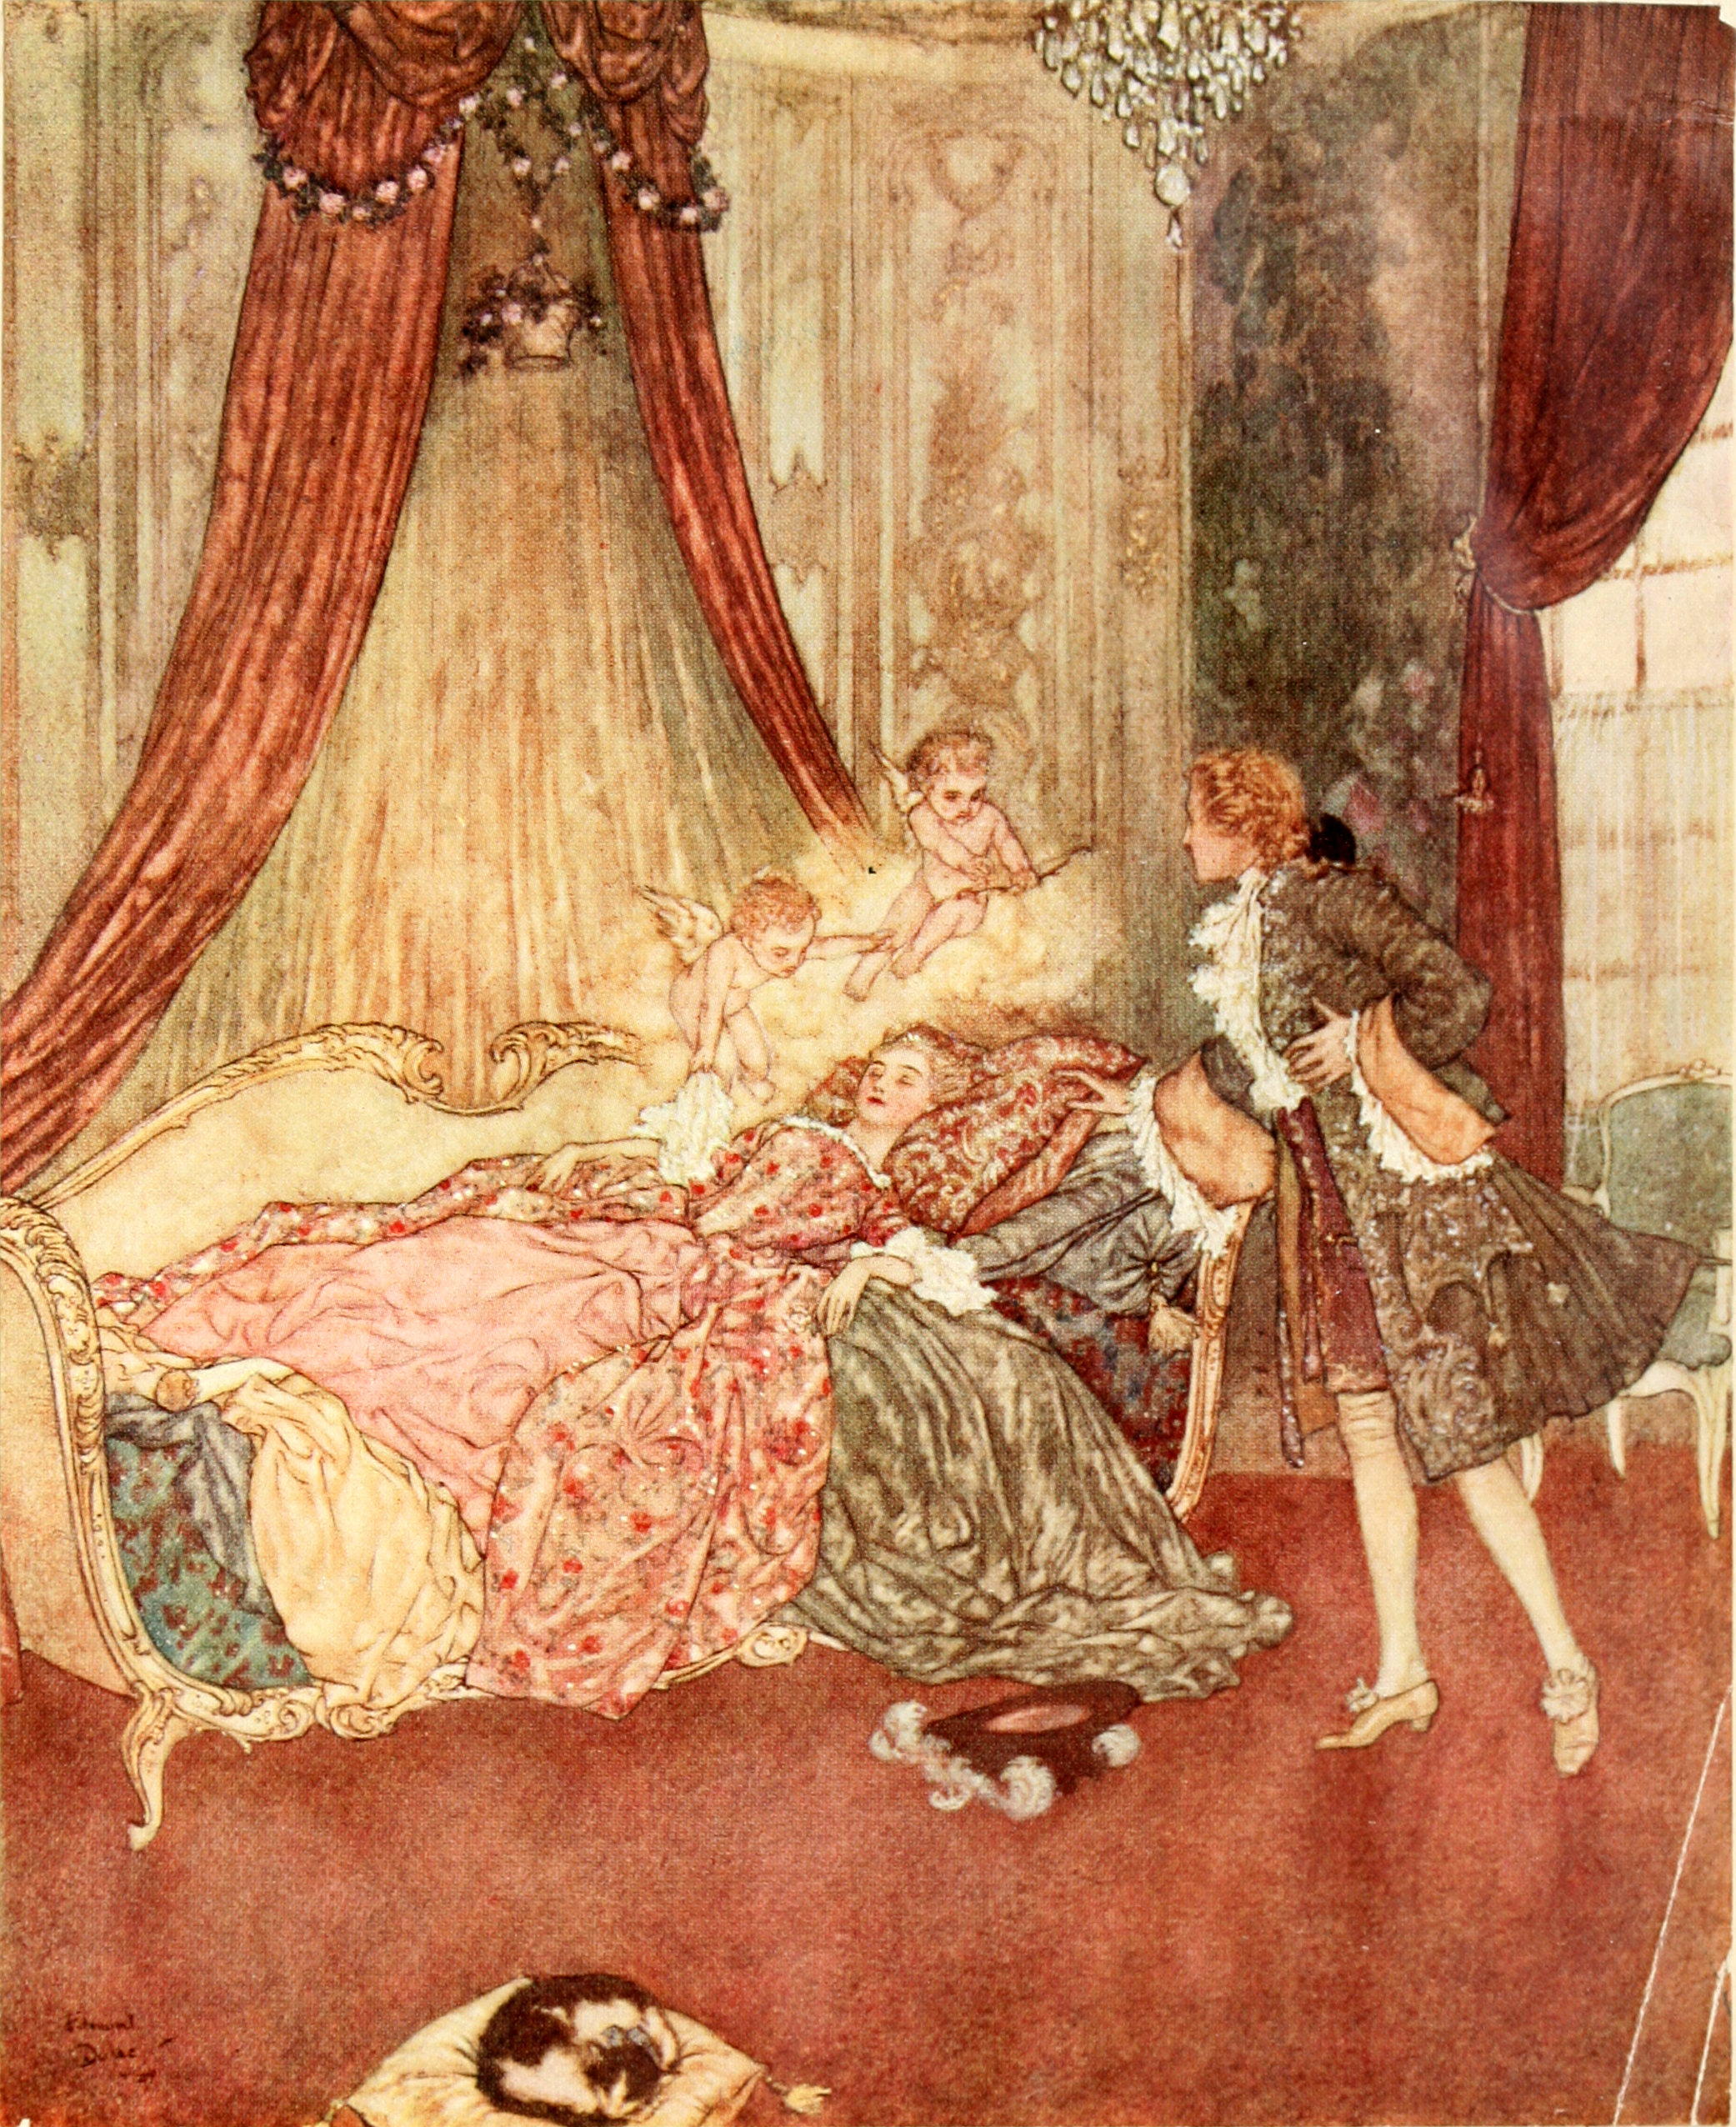 The sleeping beauty and other fairy tales - Dulac frontispiece.jpg. 